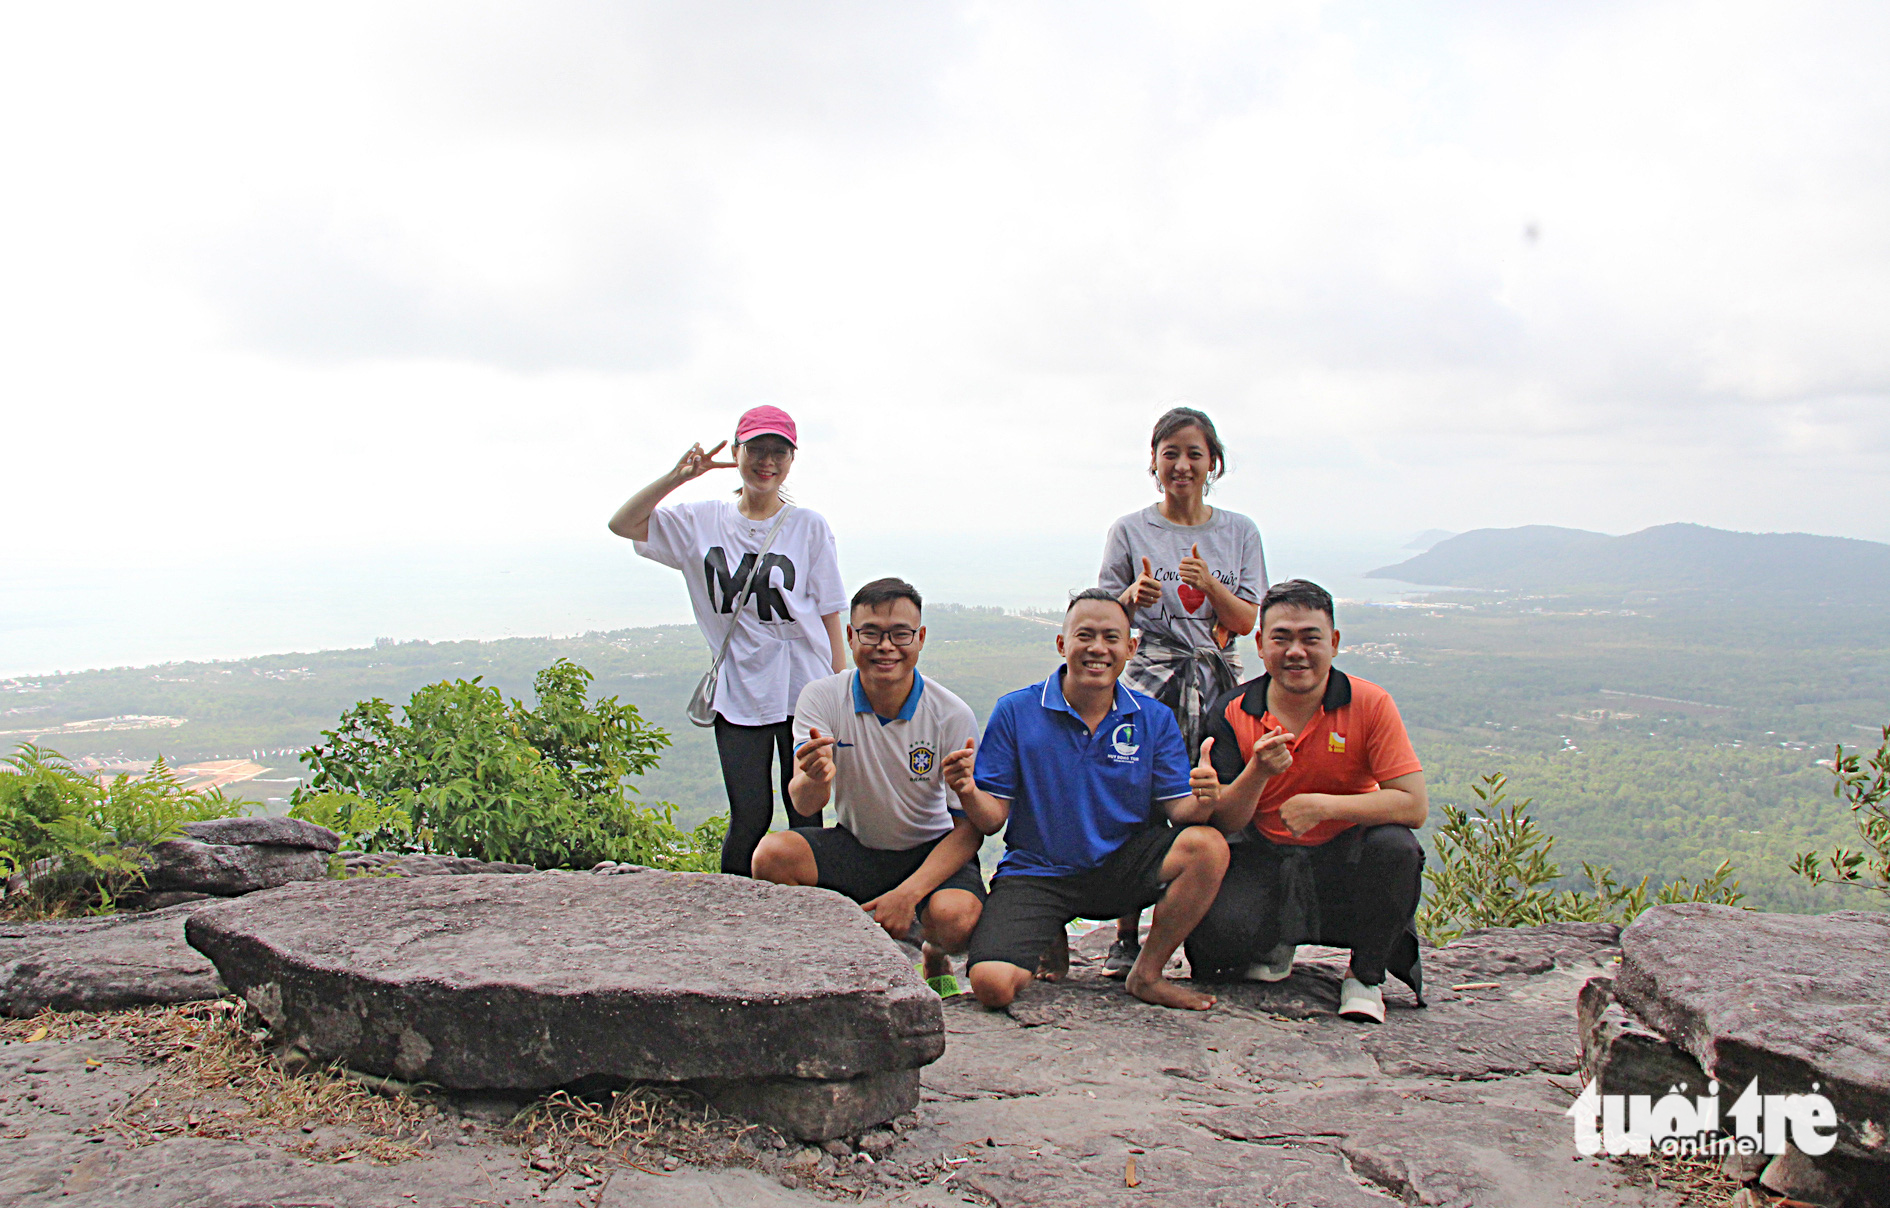 Some members of the cleanup group pose for a photo at the Tien Son mountain peak